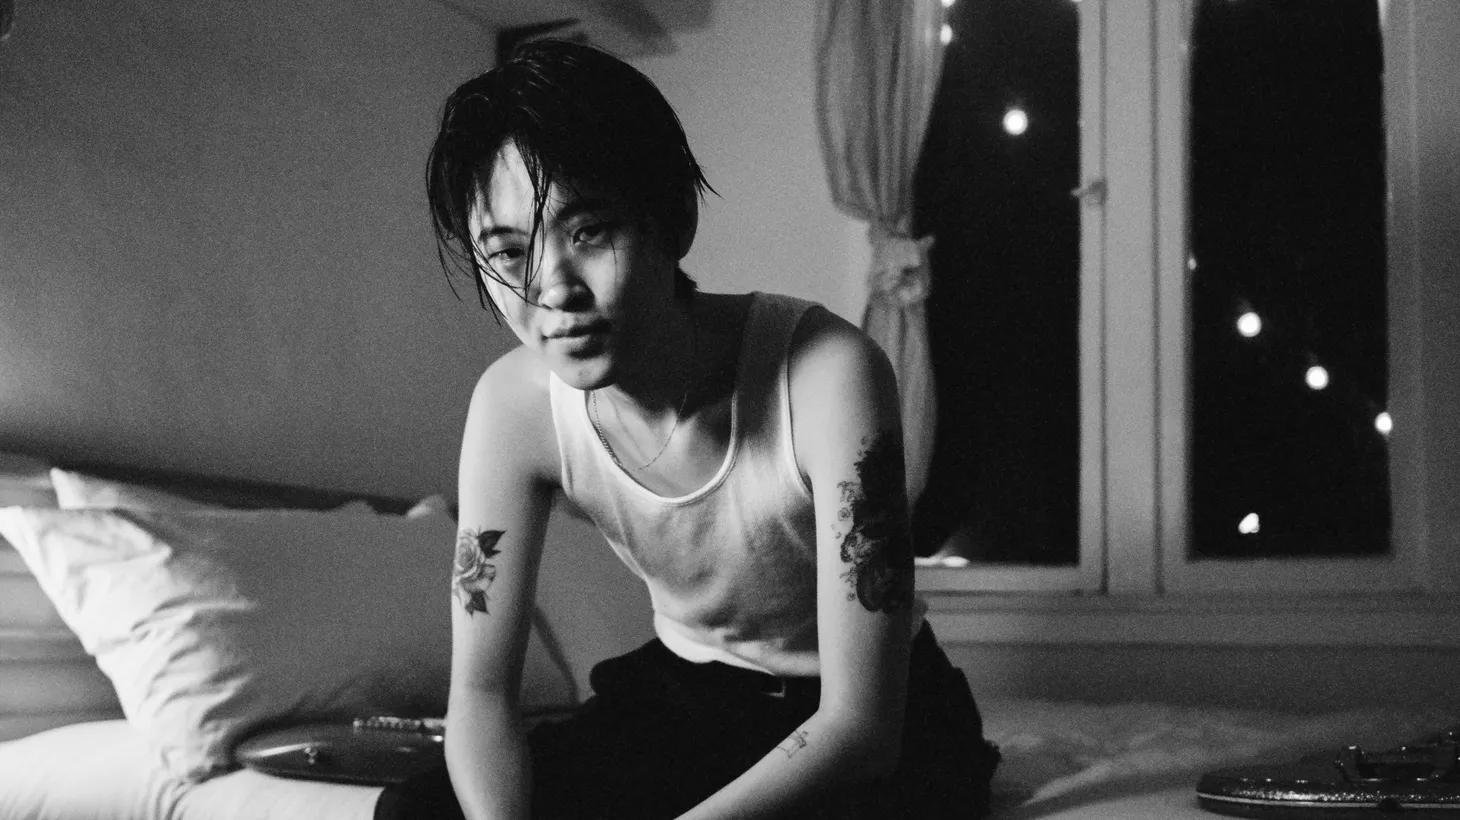 Baek Hwong is an LA-based non-binary artist who goes by the moniker NoSo, a nod to their Korean heritage.